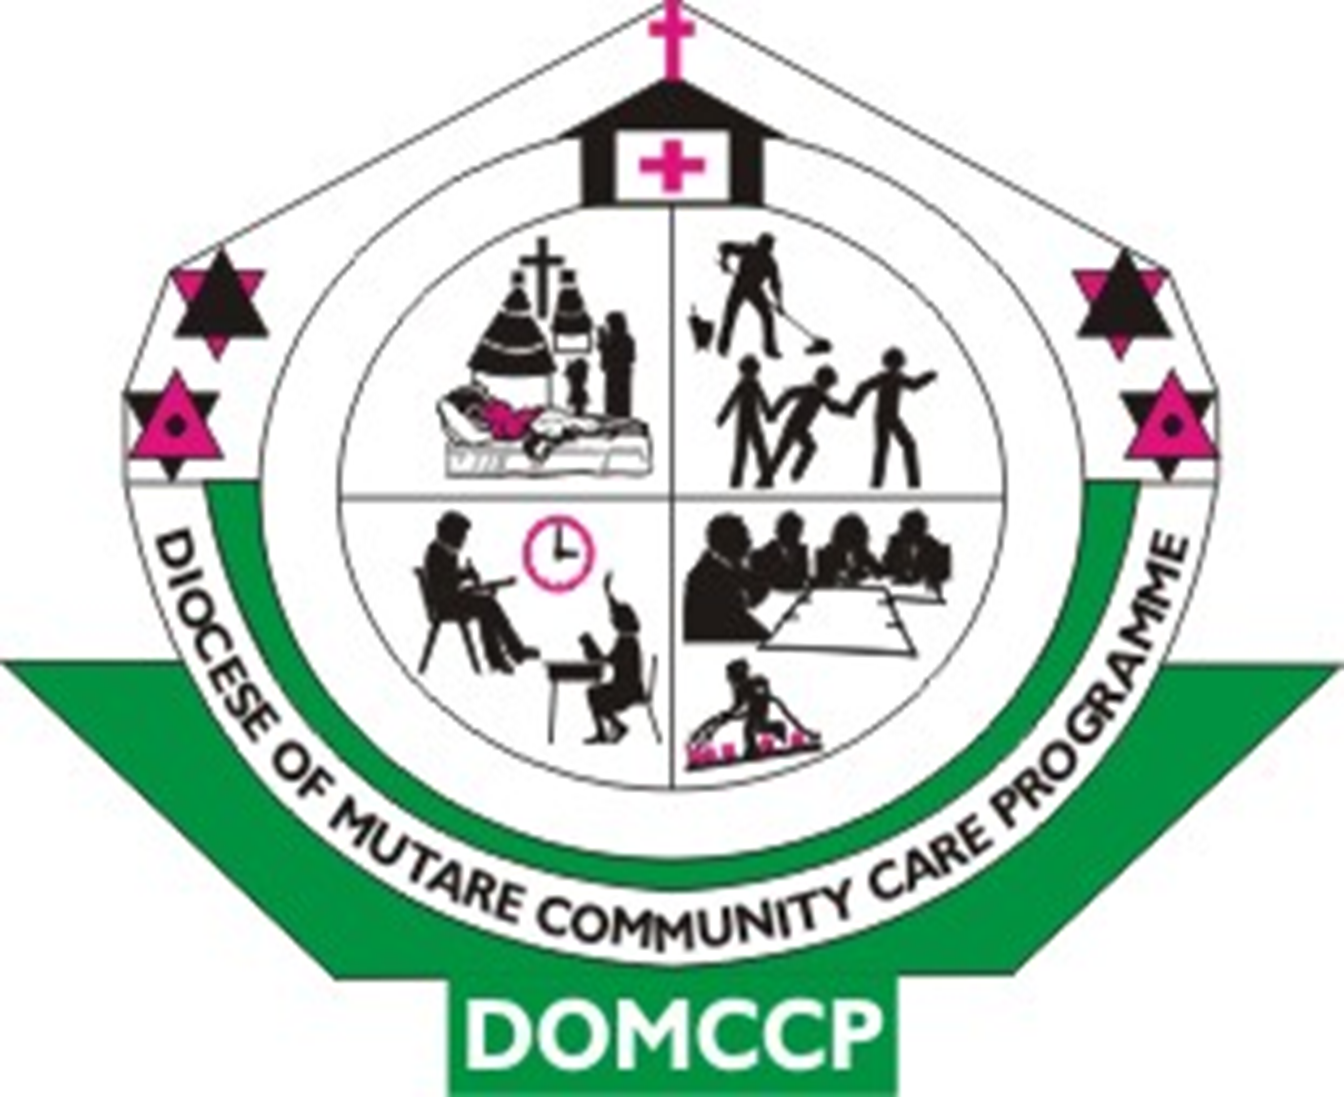 Diocese of Mutare Community Care Programme (DOMCCP)